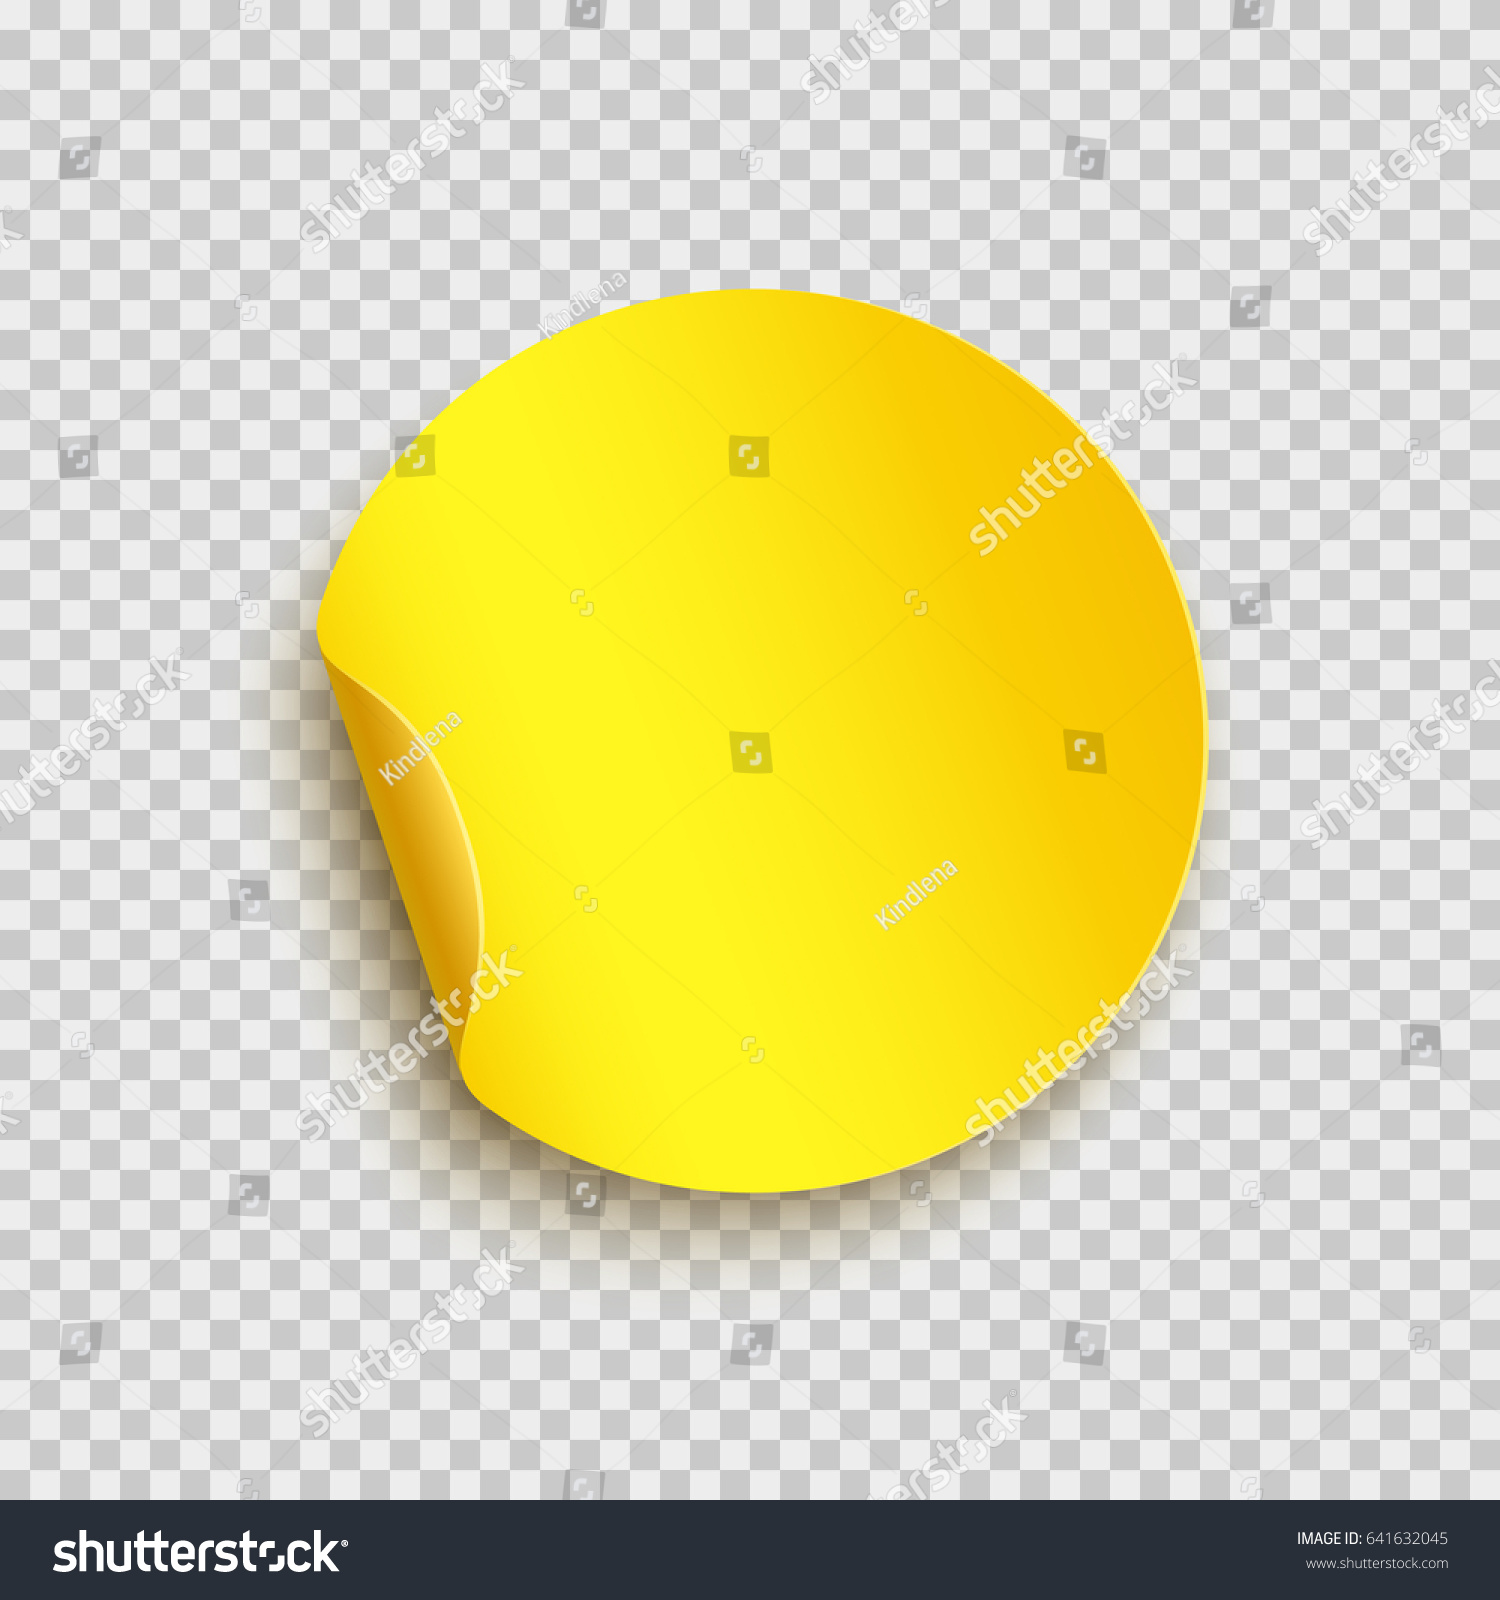 Sticker with peel off corner isolated on transparent background. Vector yellow blank paper banner or circle folded label.  #641632045